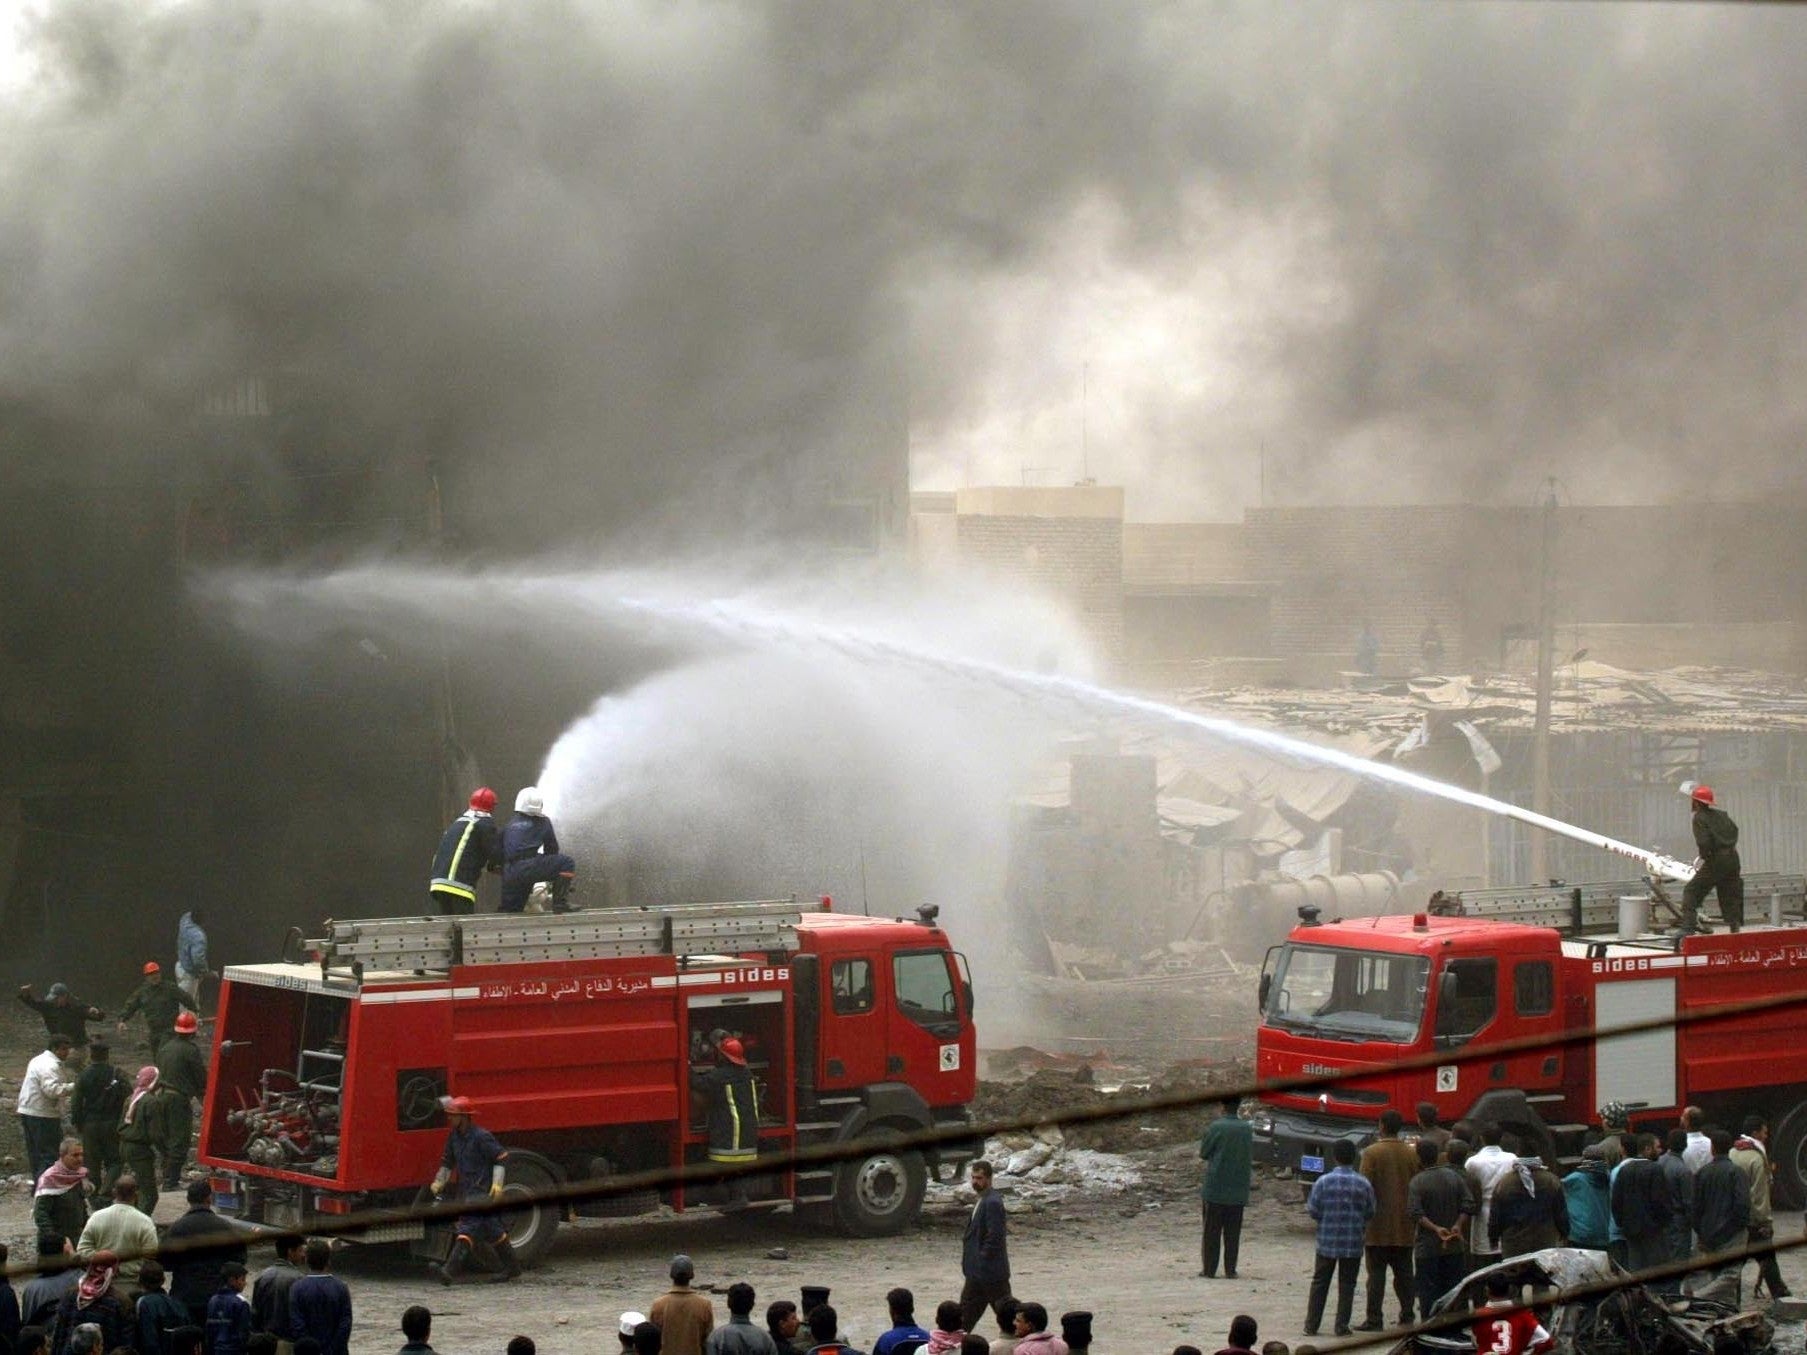 Iraqi firefighters tackle a burning building after the airstrike in Baghdad